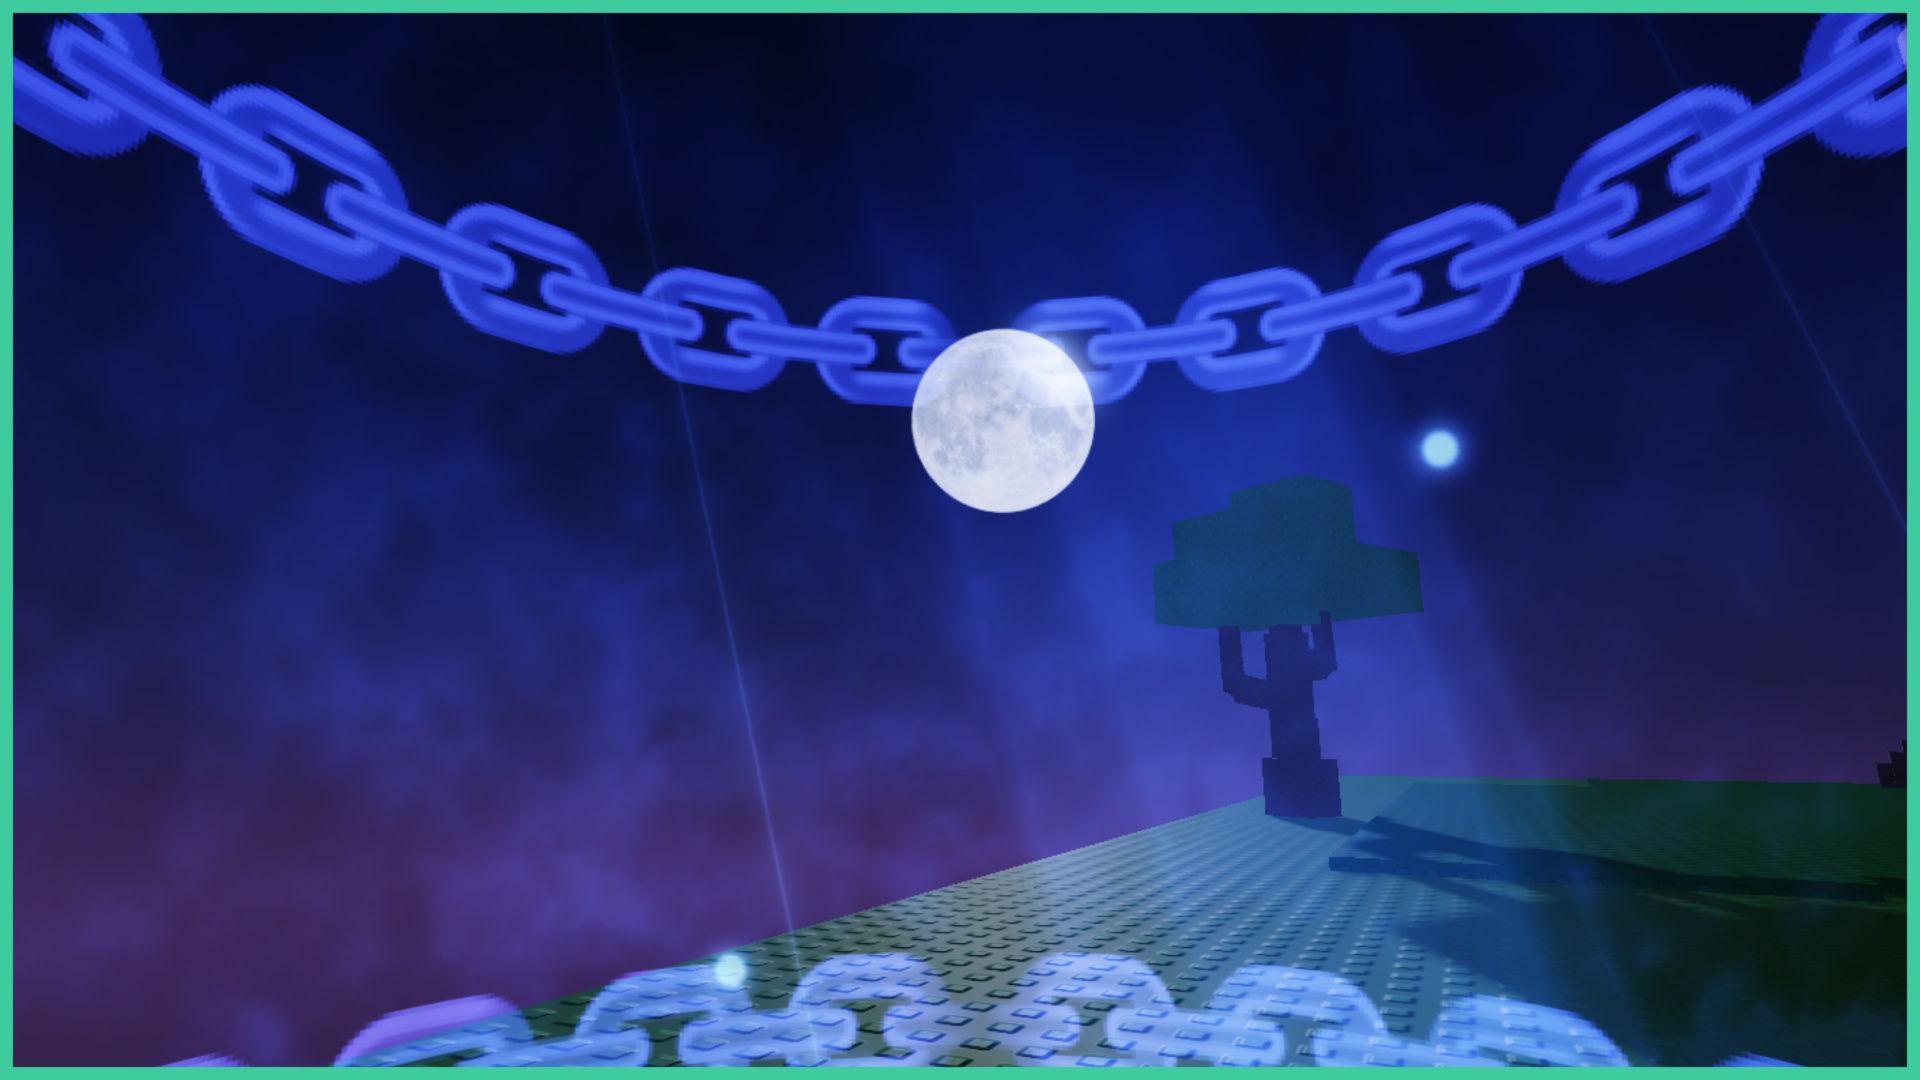 feature image for our sol's rng biomes guide, the image features a screenshot of the moon in the night sky as a glowing blue chain goes across the screen with a blue mist, there is a lone tree at the edge of a grass platform